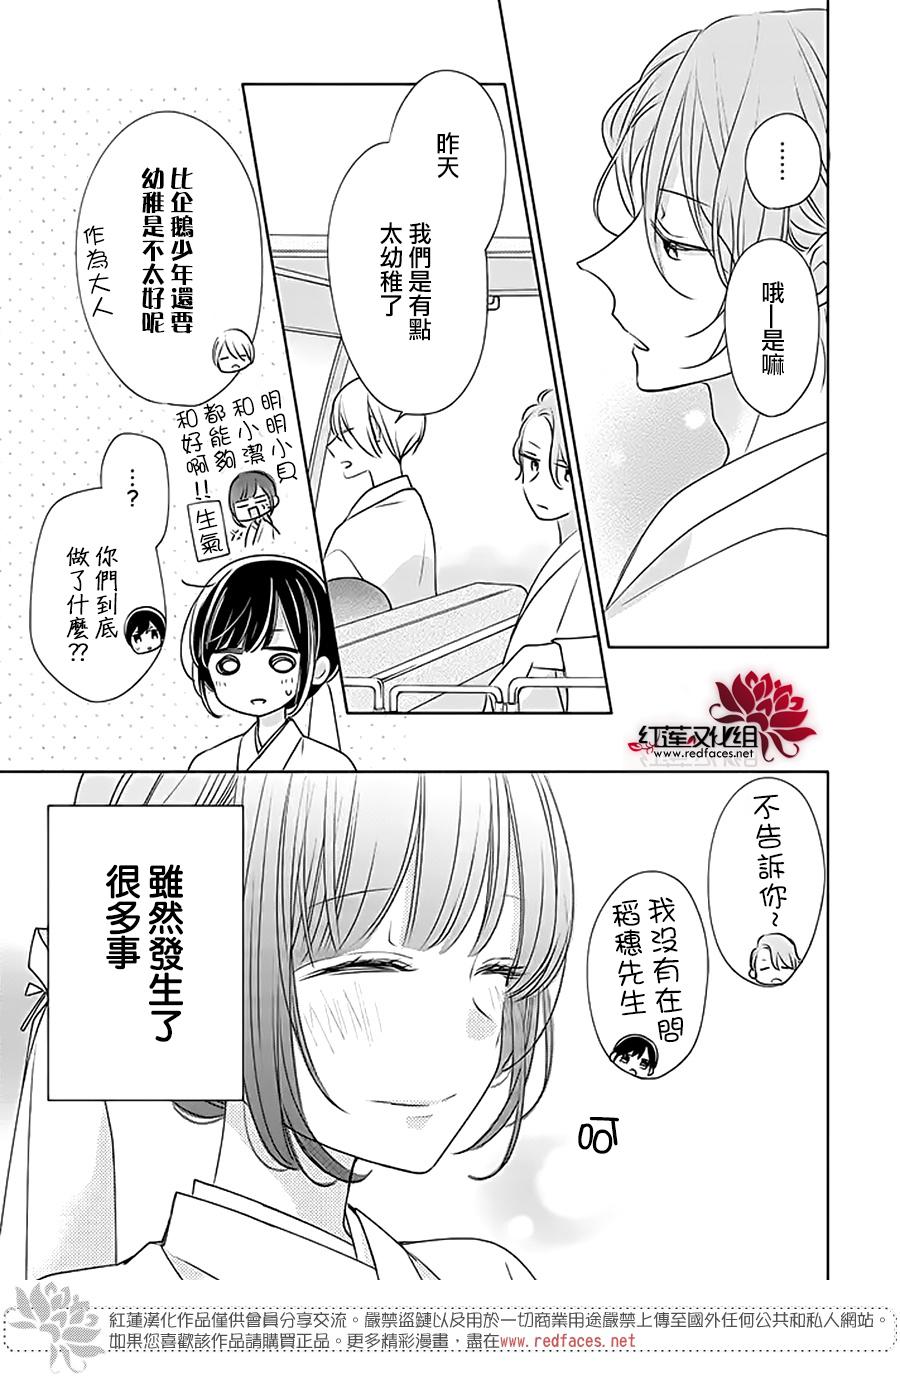 If given a second chance - 31話 - 2